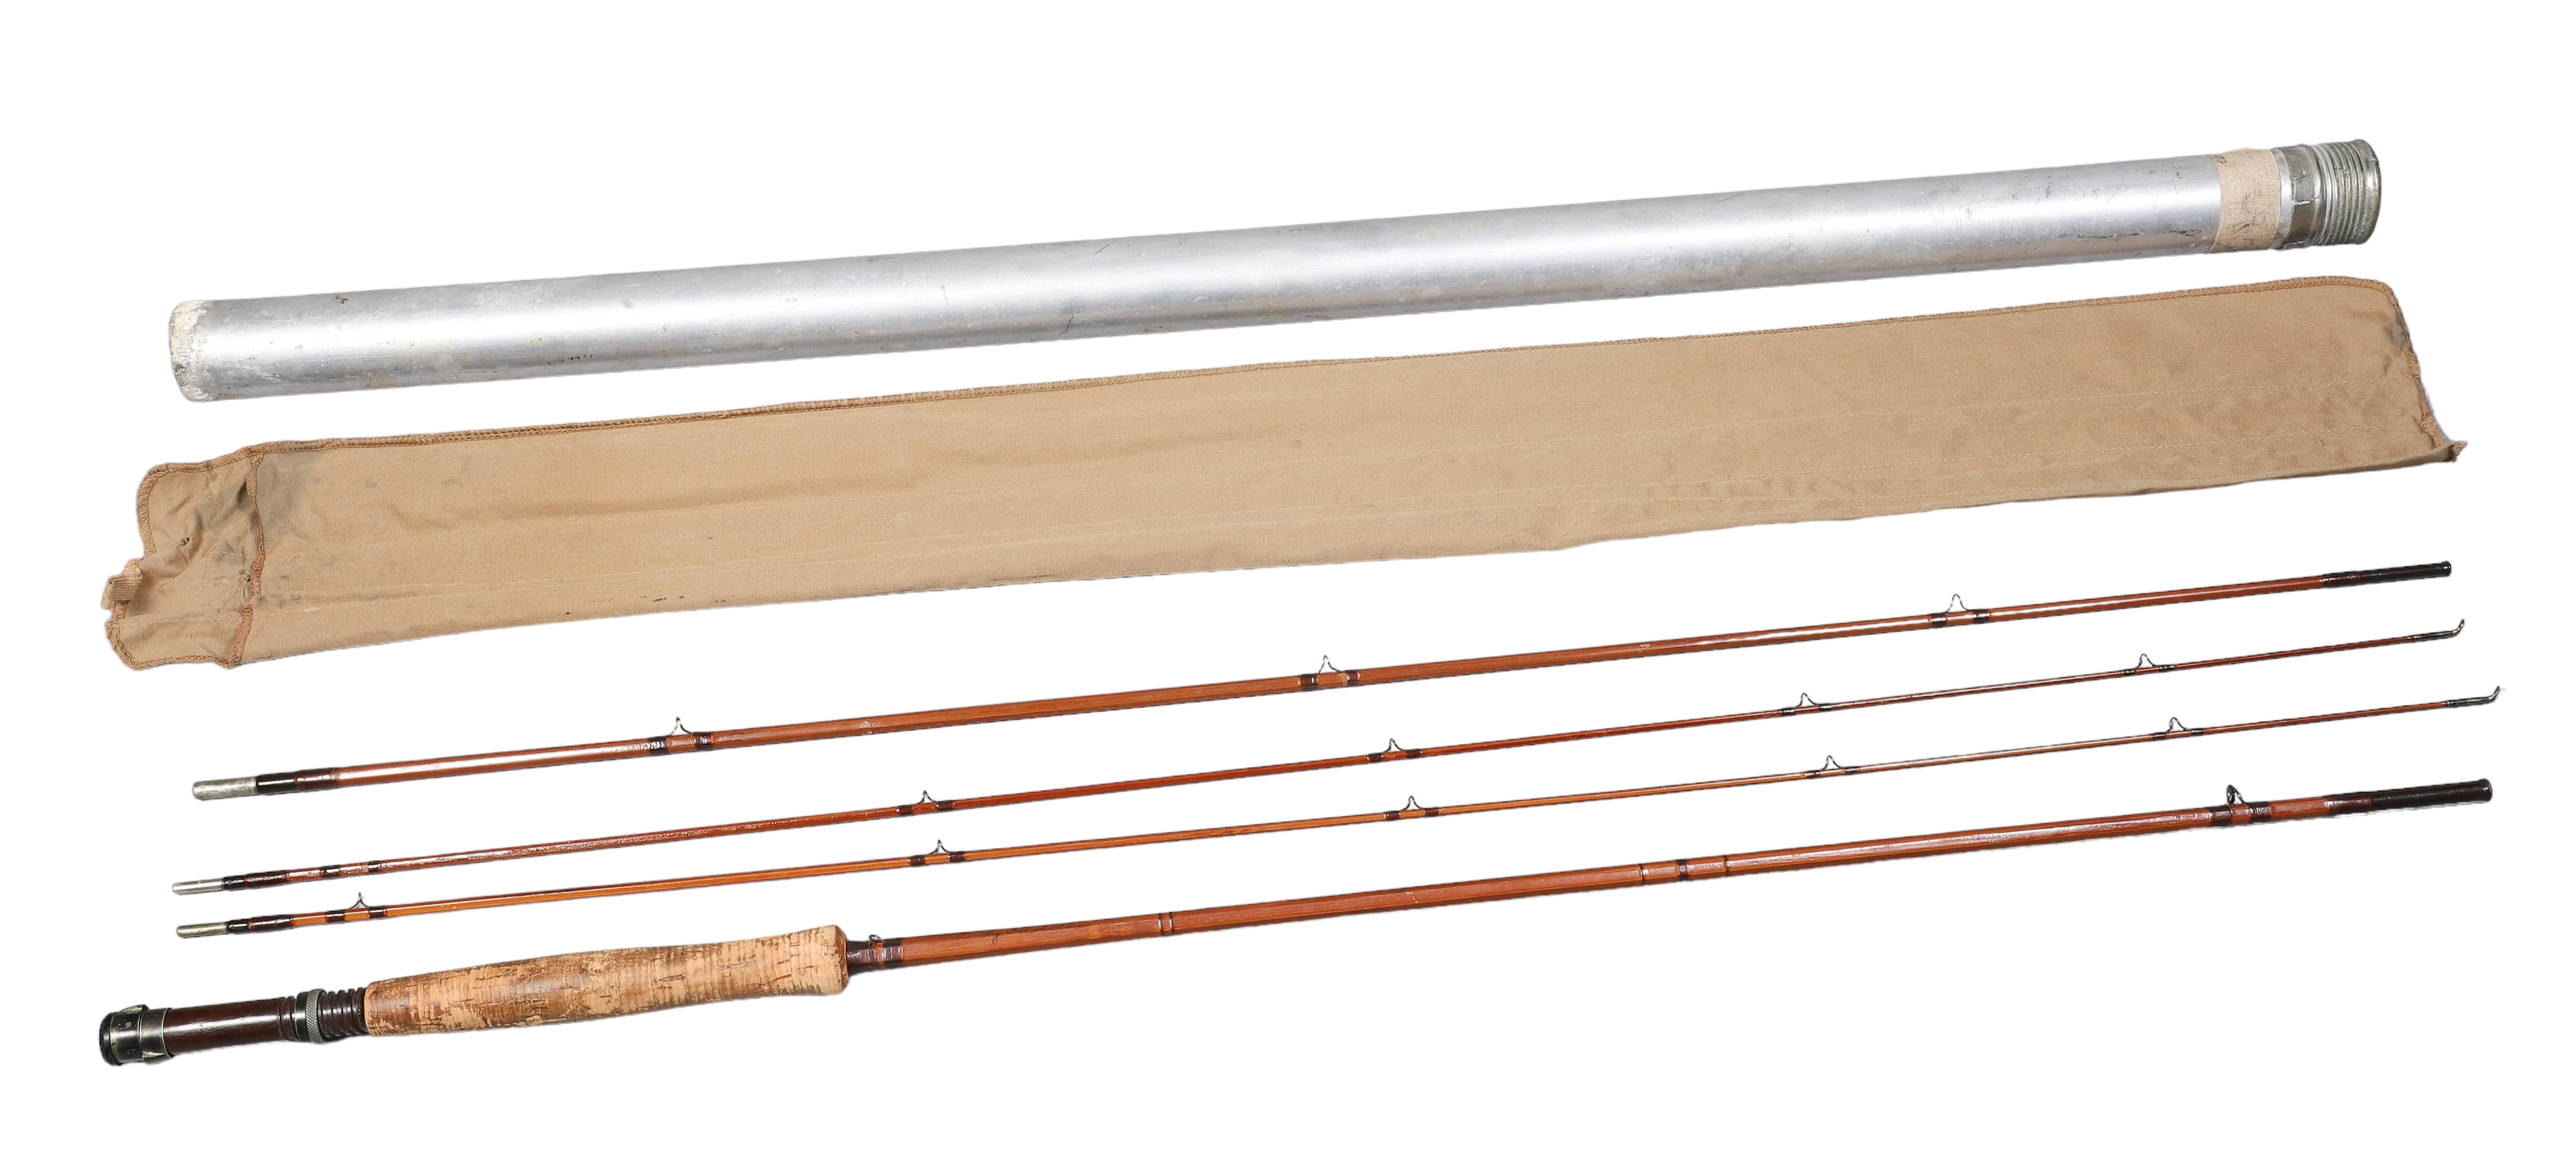 Bamboo 4-part fly rod, with fabric